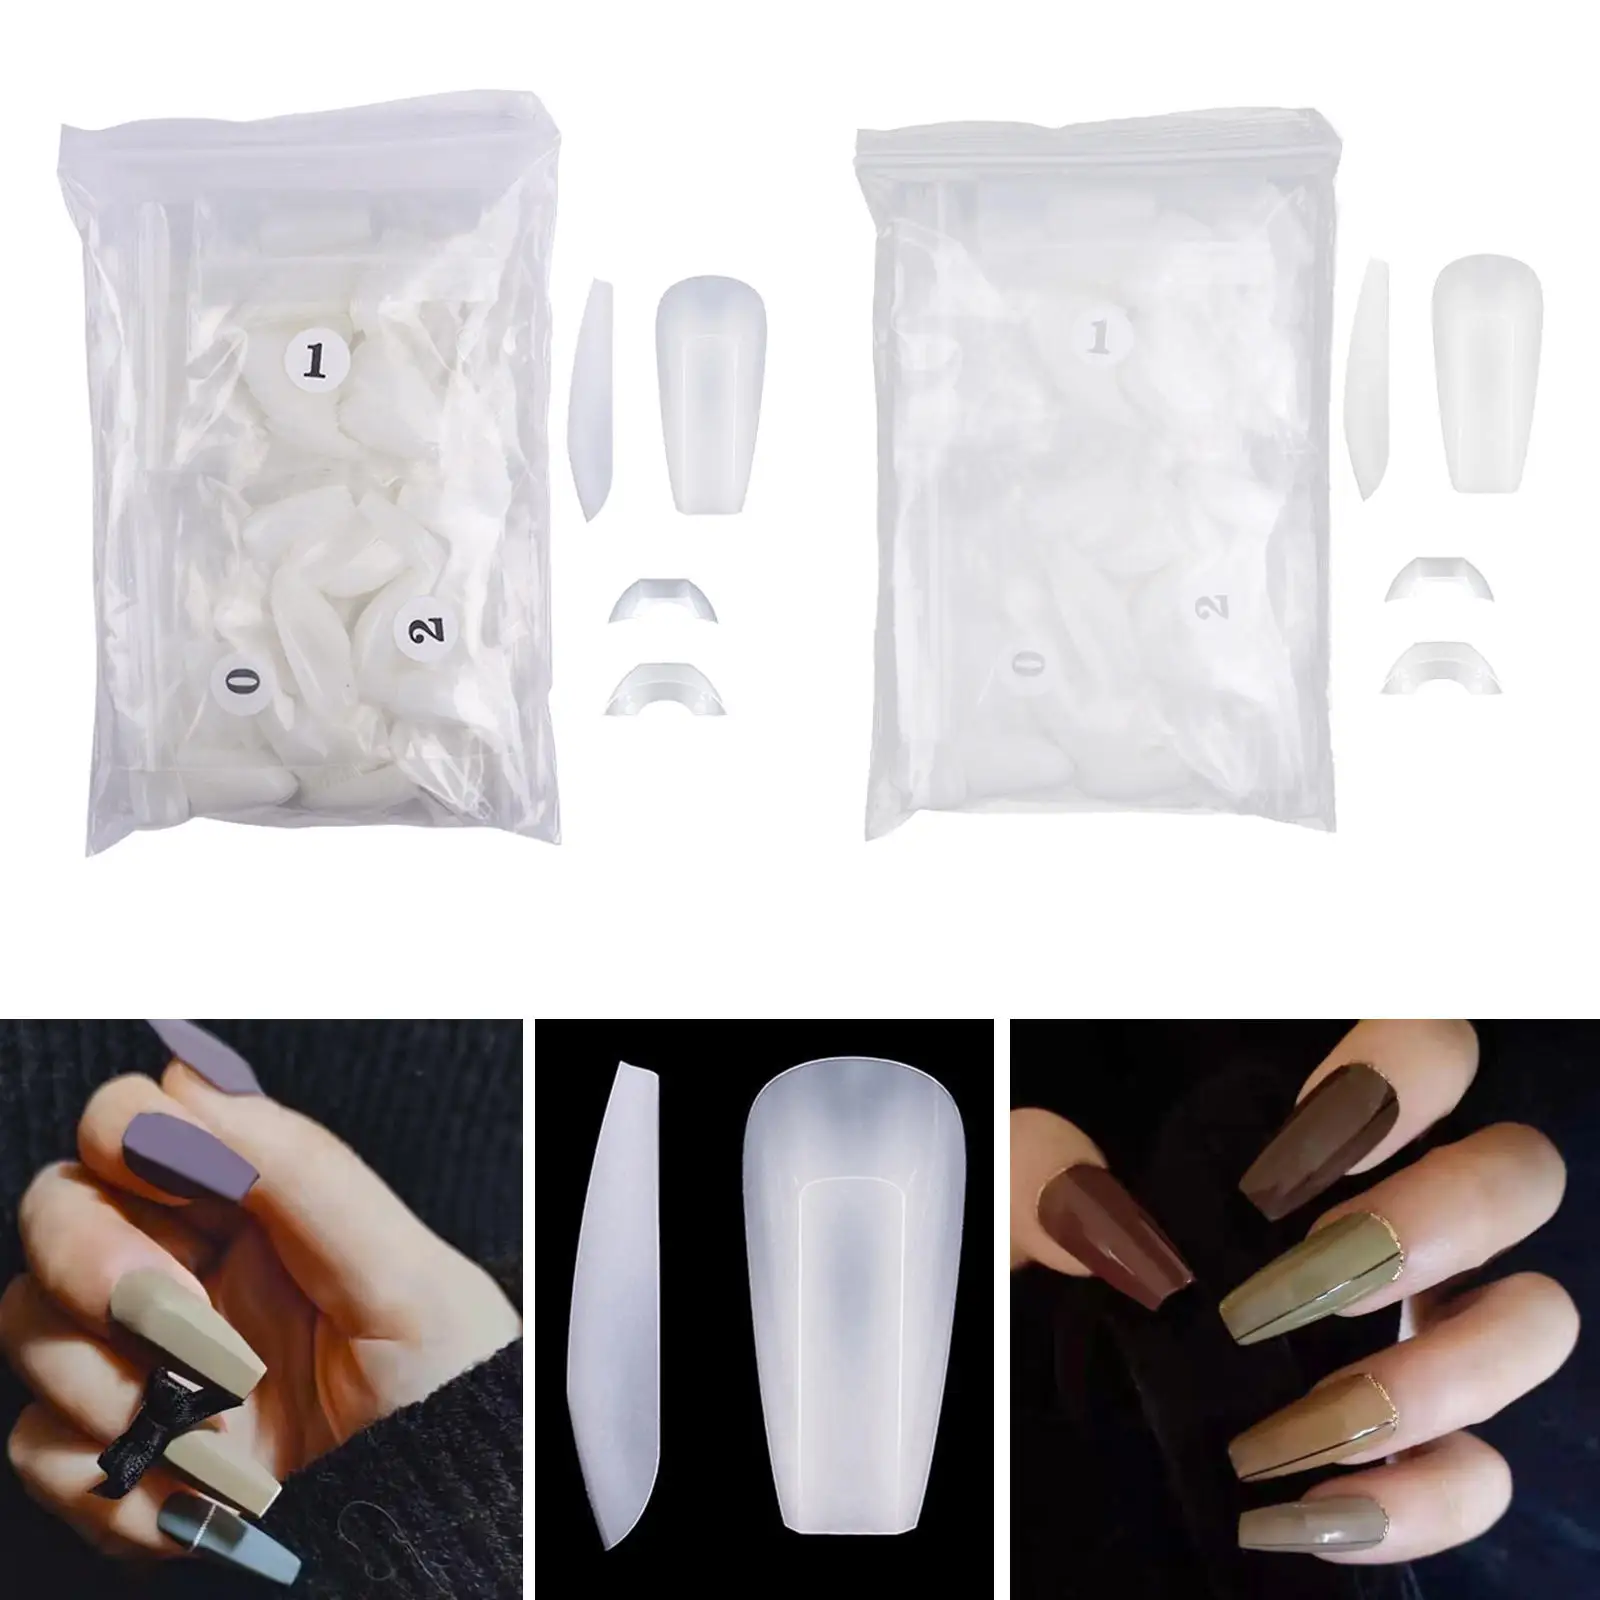 504x False Nail Tips Simple Operation Manicure Nail Care Artificial Portable for Parties Weddings Appointments Lady Girls